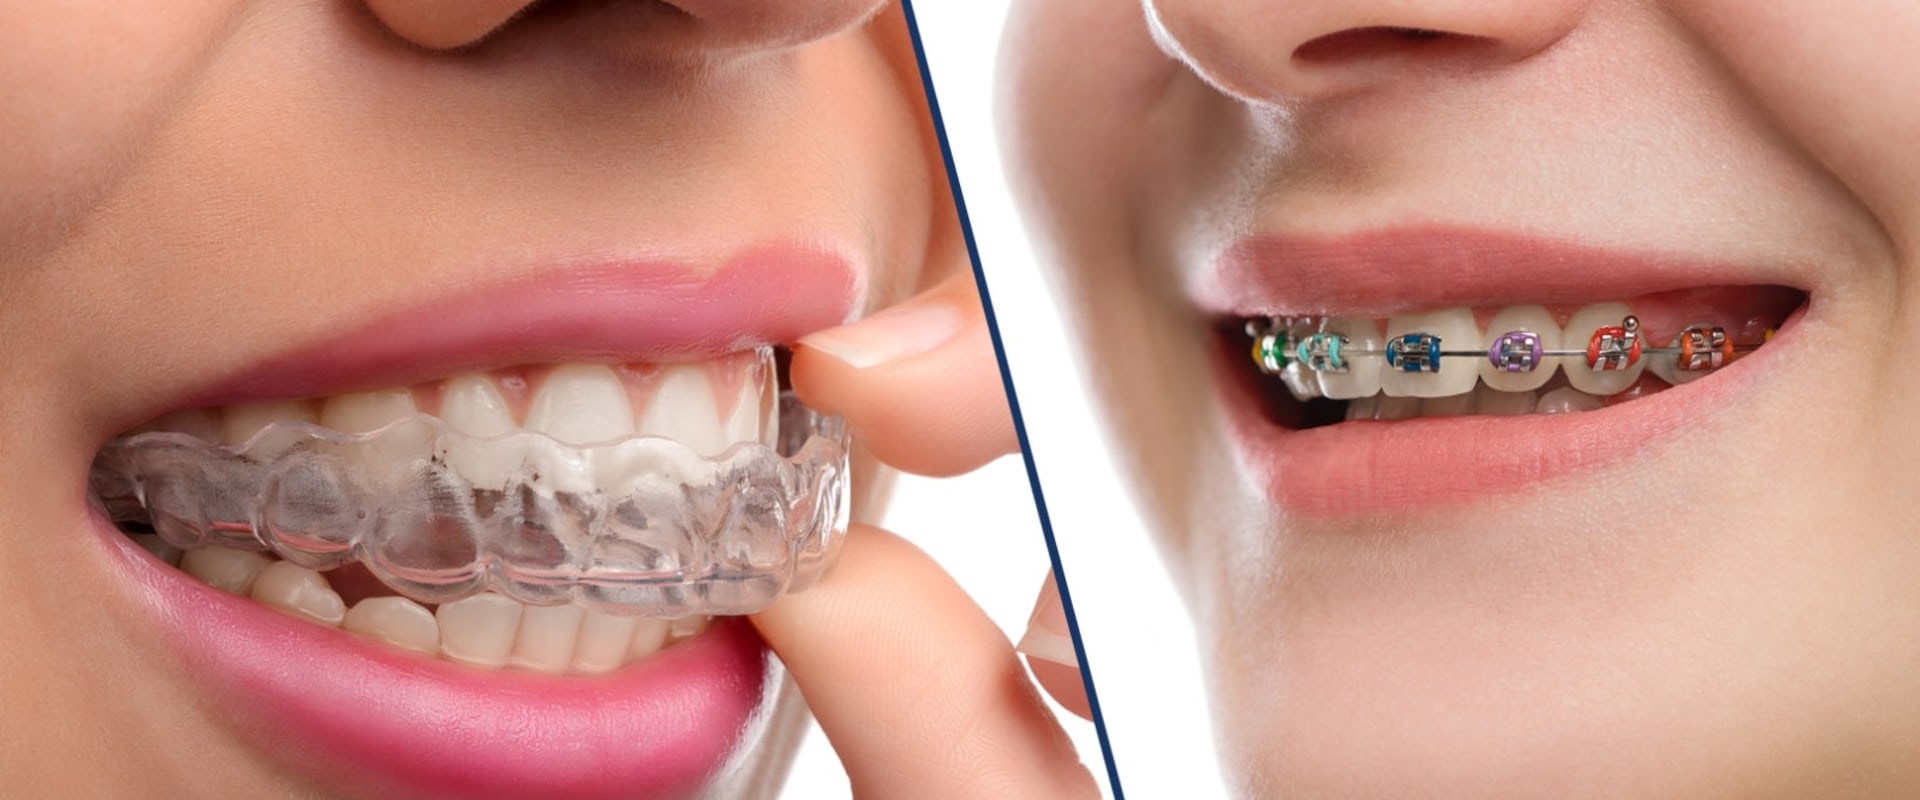 Is invisalign better than braces?